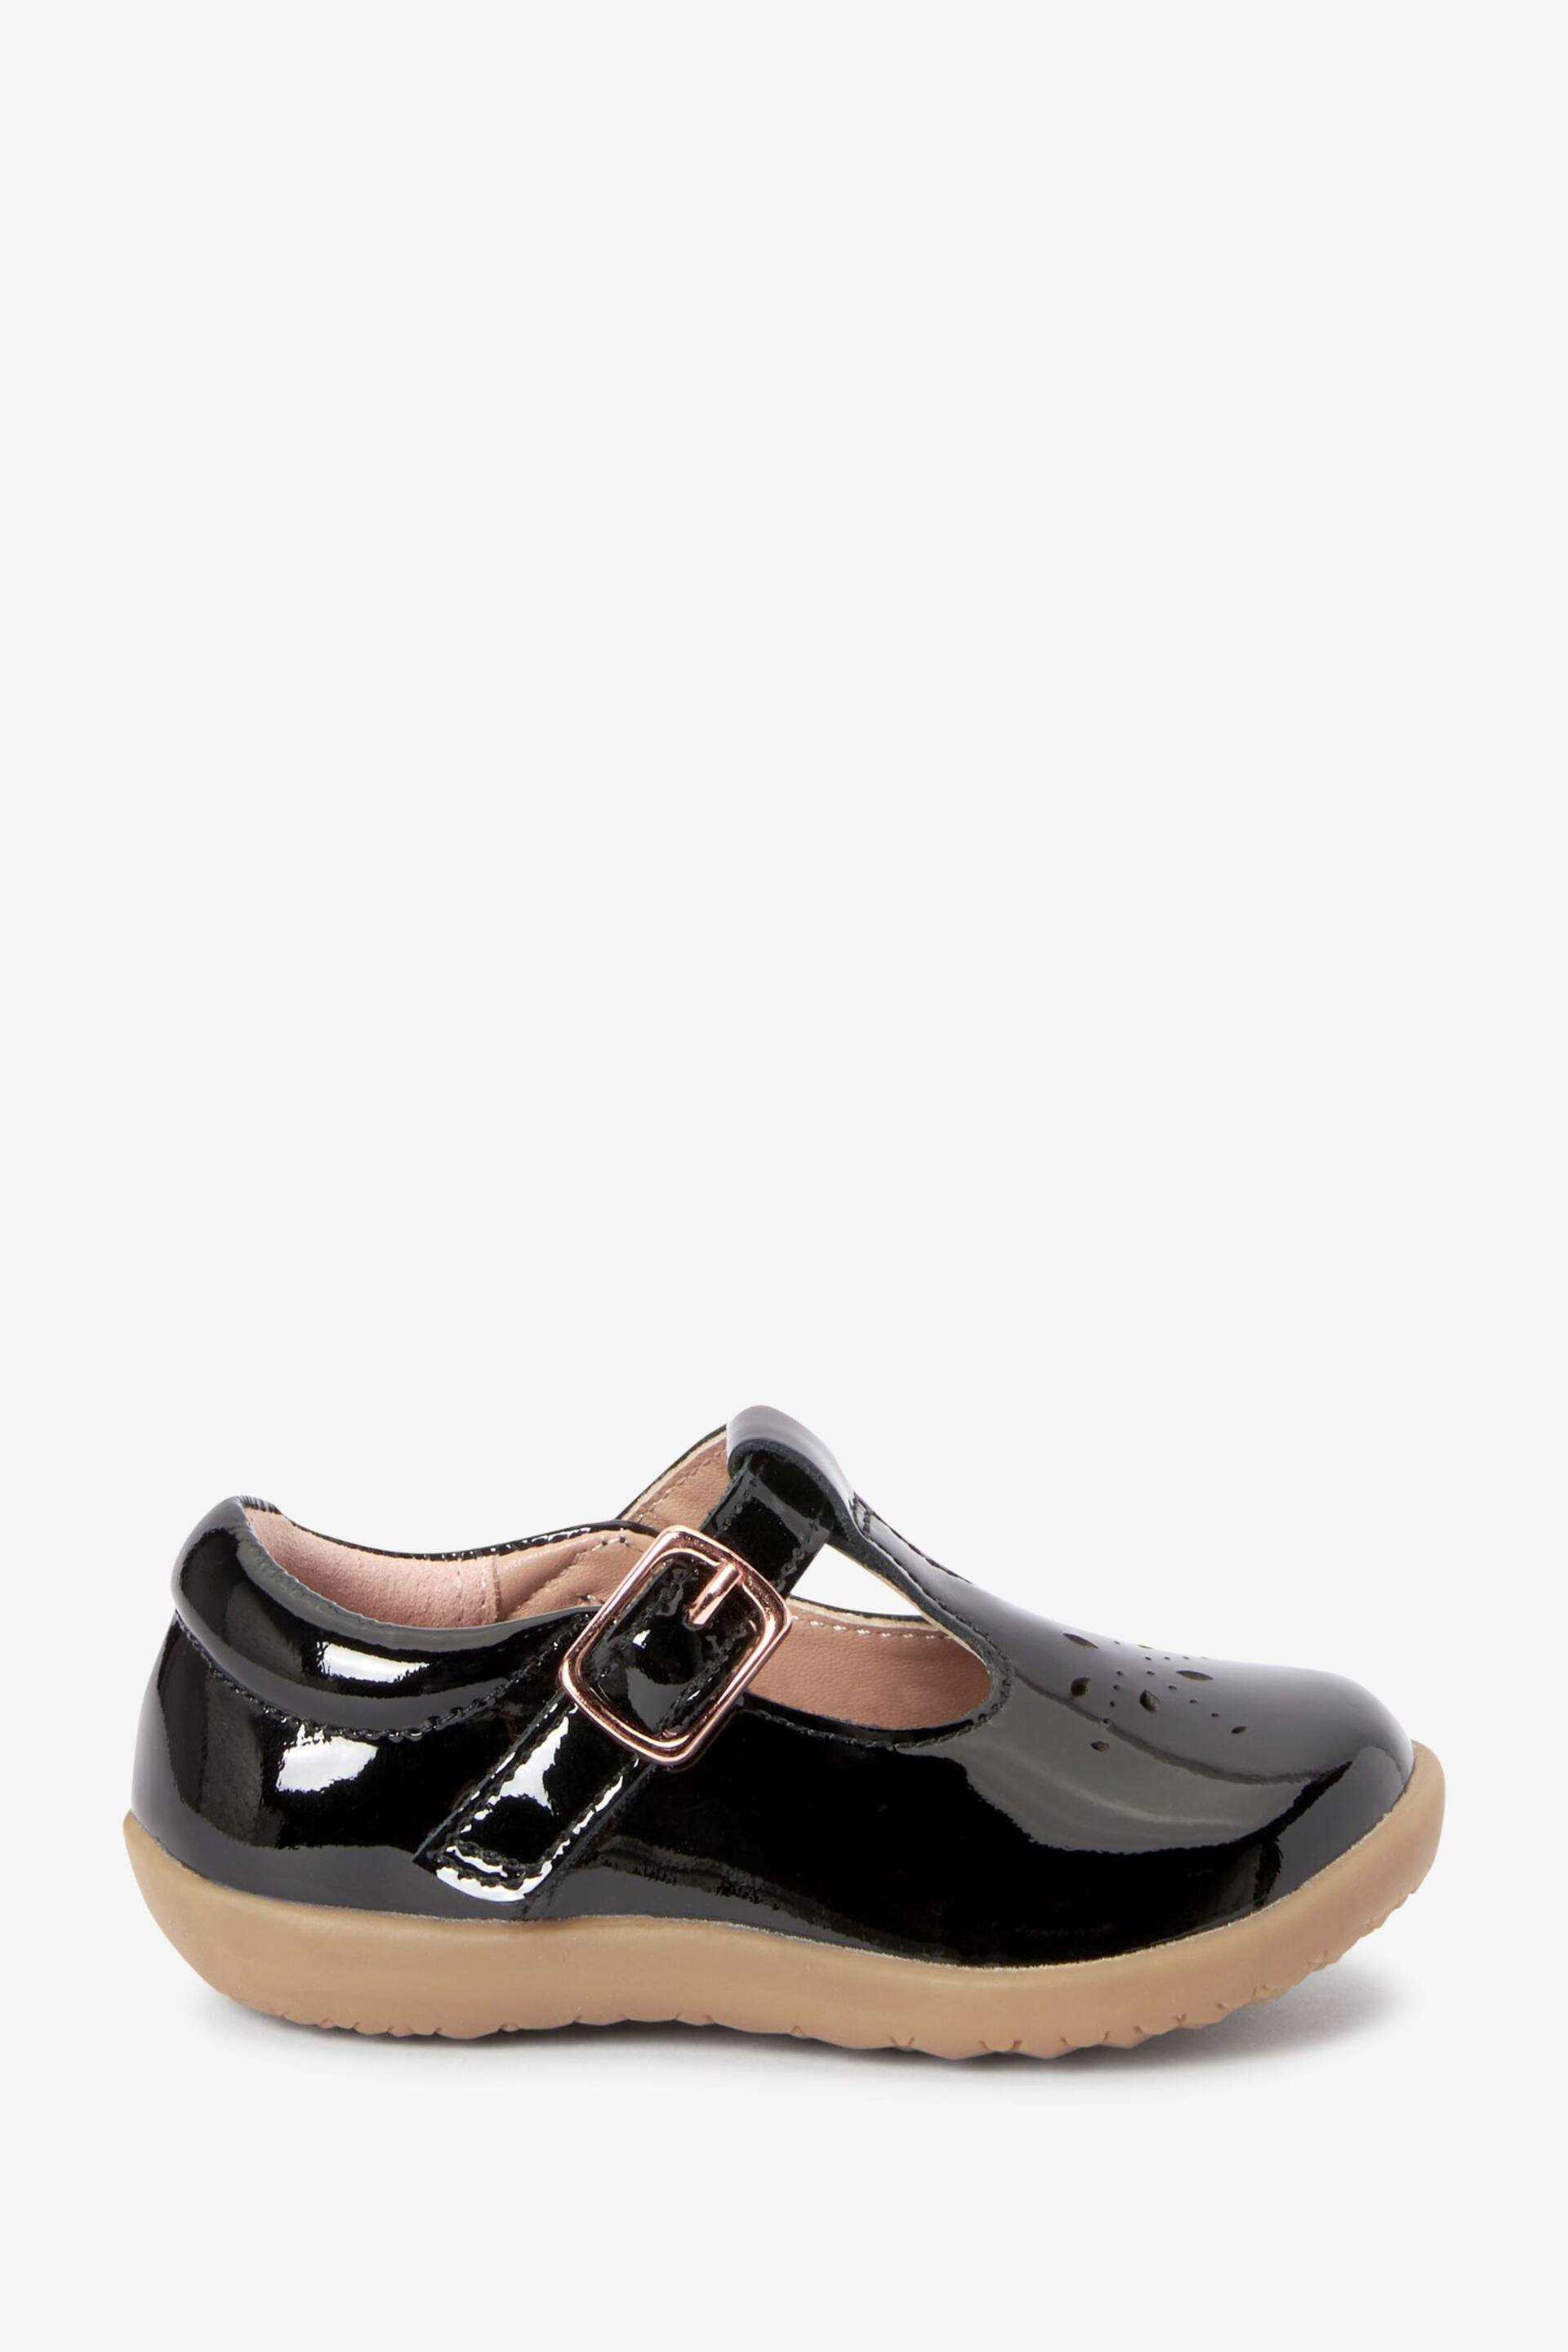 Black Patent Leather Standard Fit (F) First Walker T-Bar Shoes - Image 1 of 4